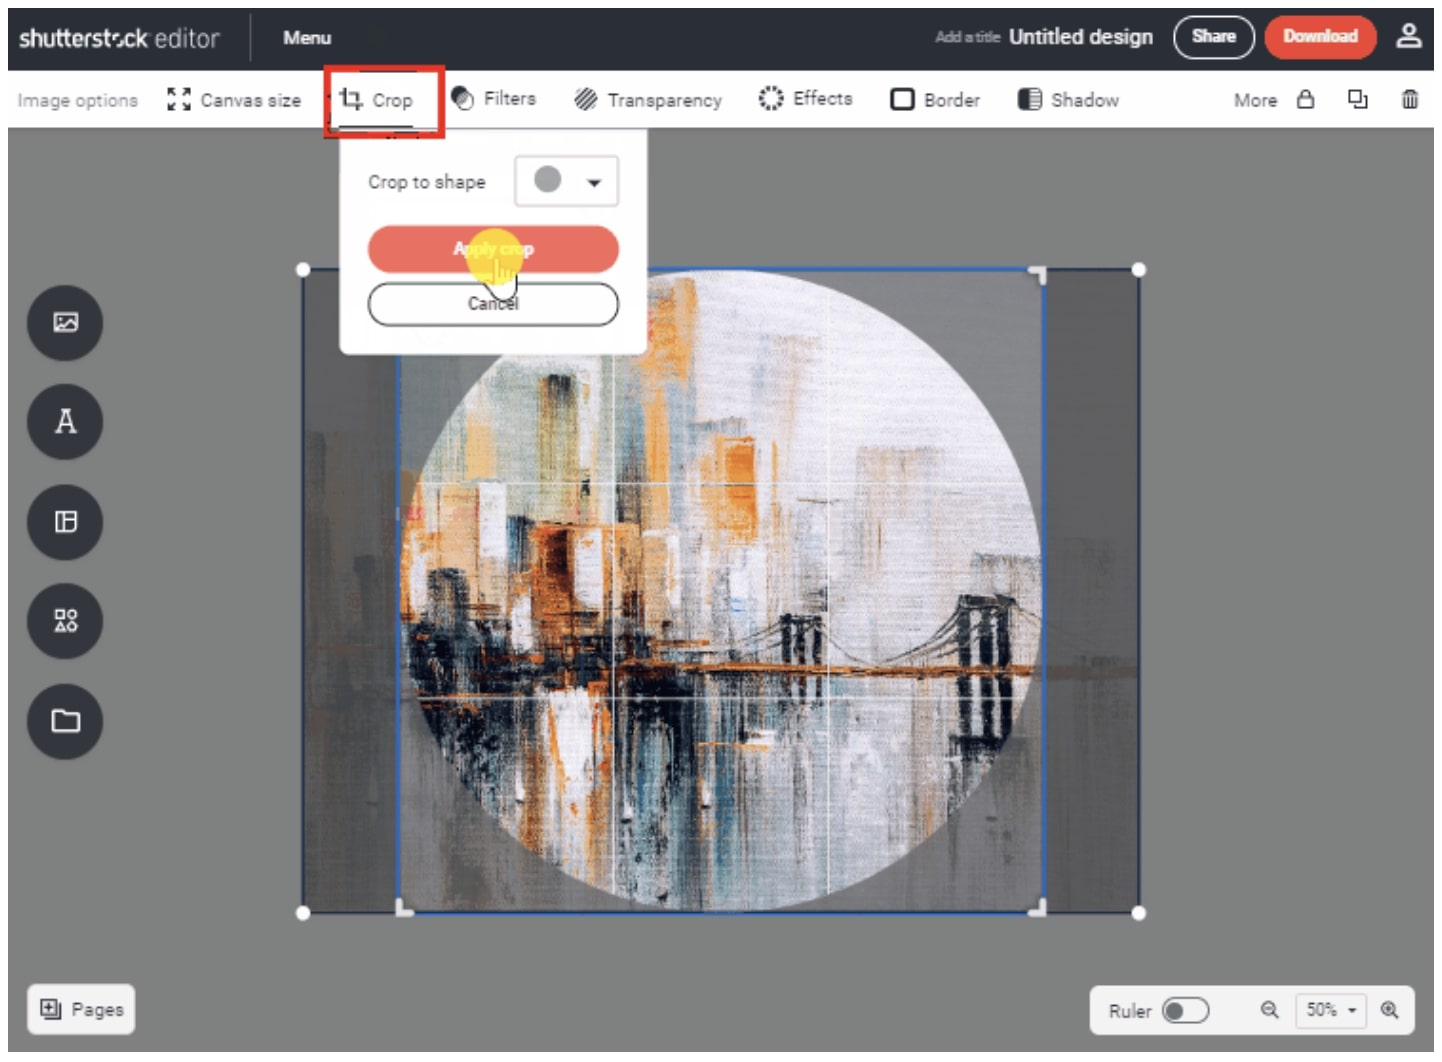 Edition d’images avec Shutterstock Editor : guide complet